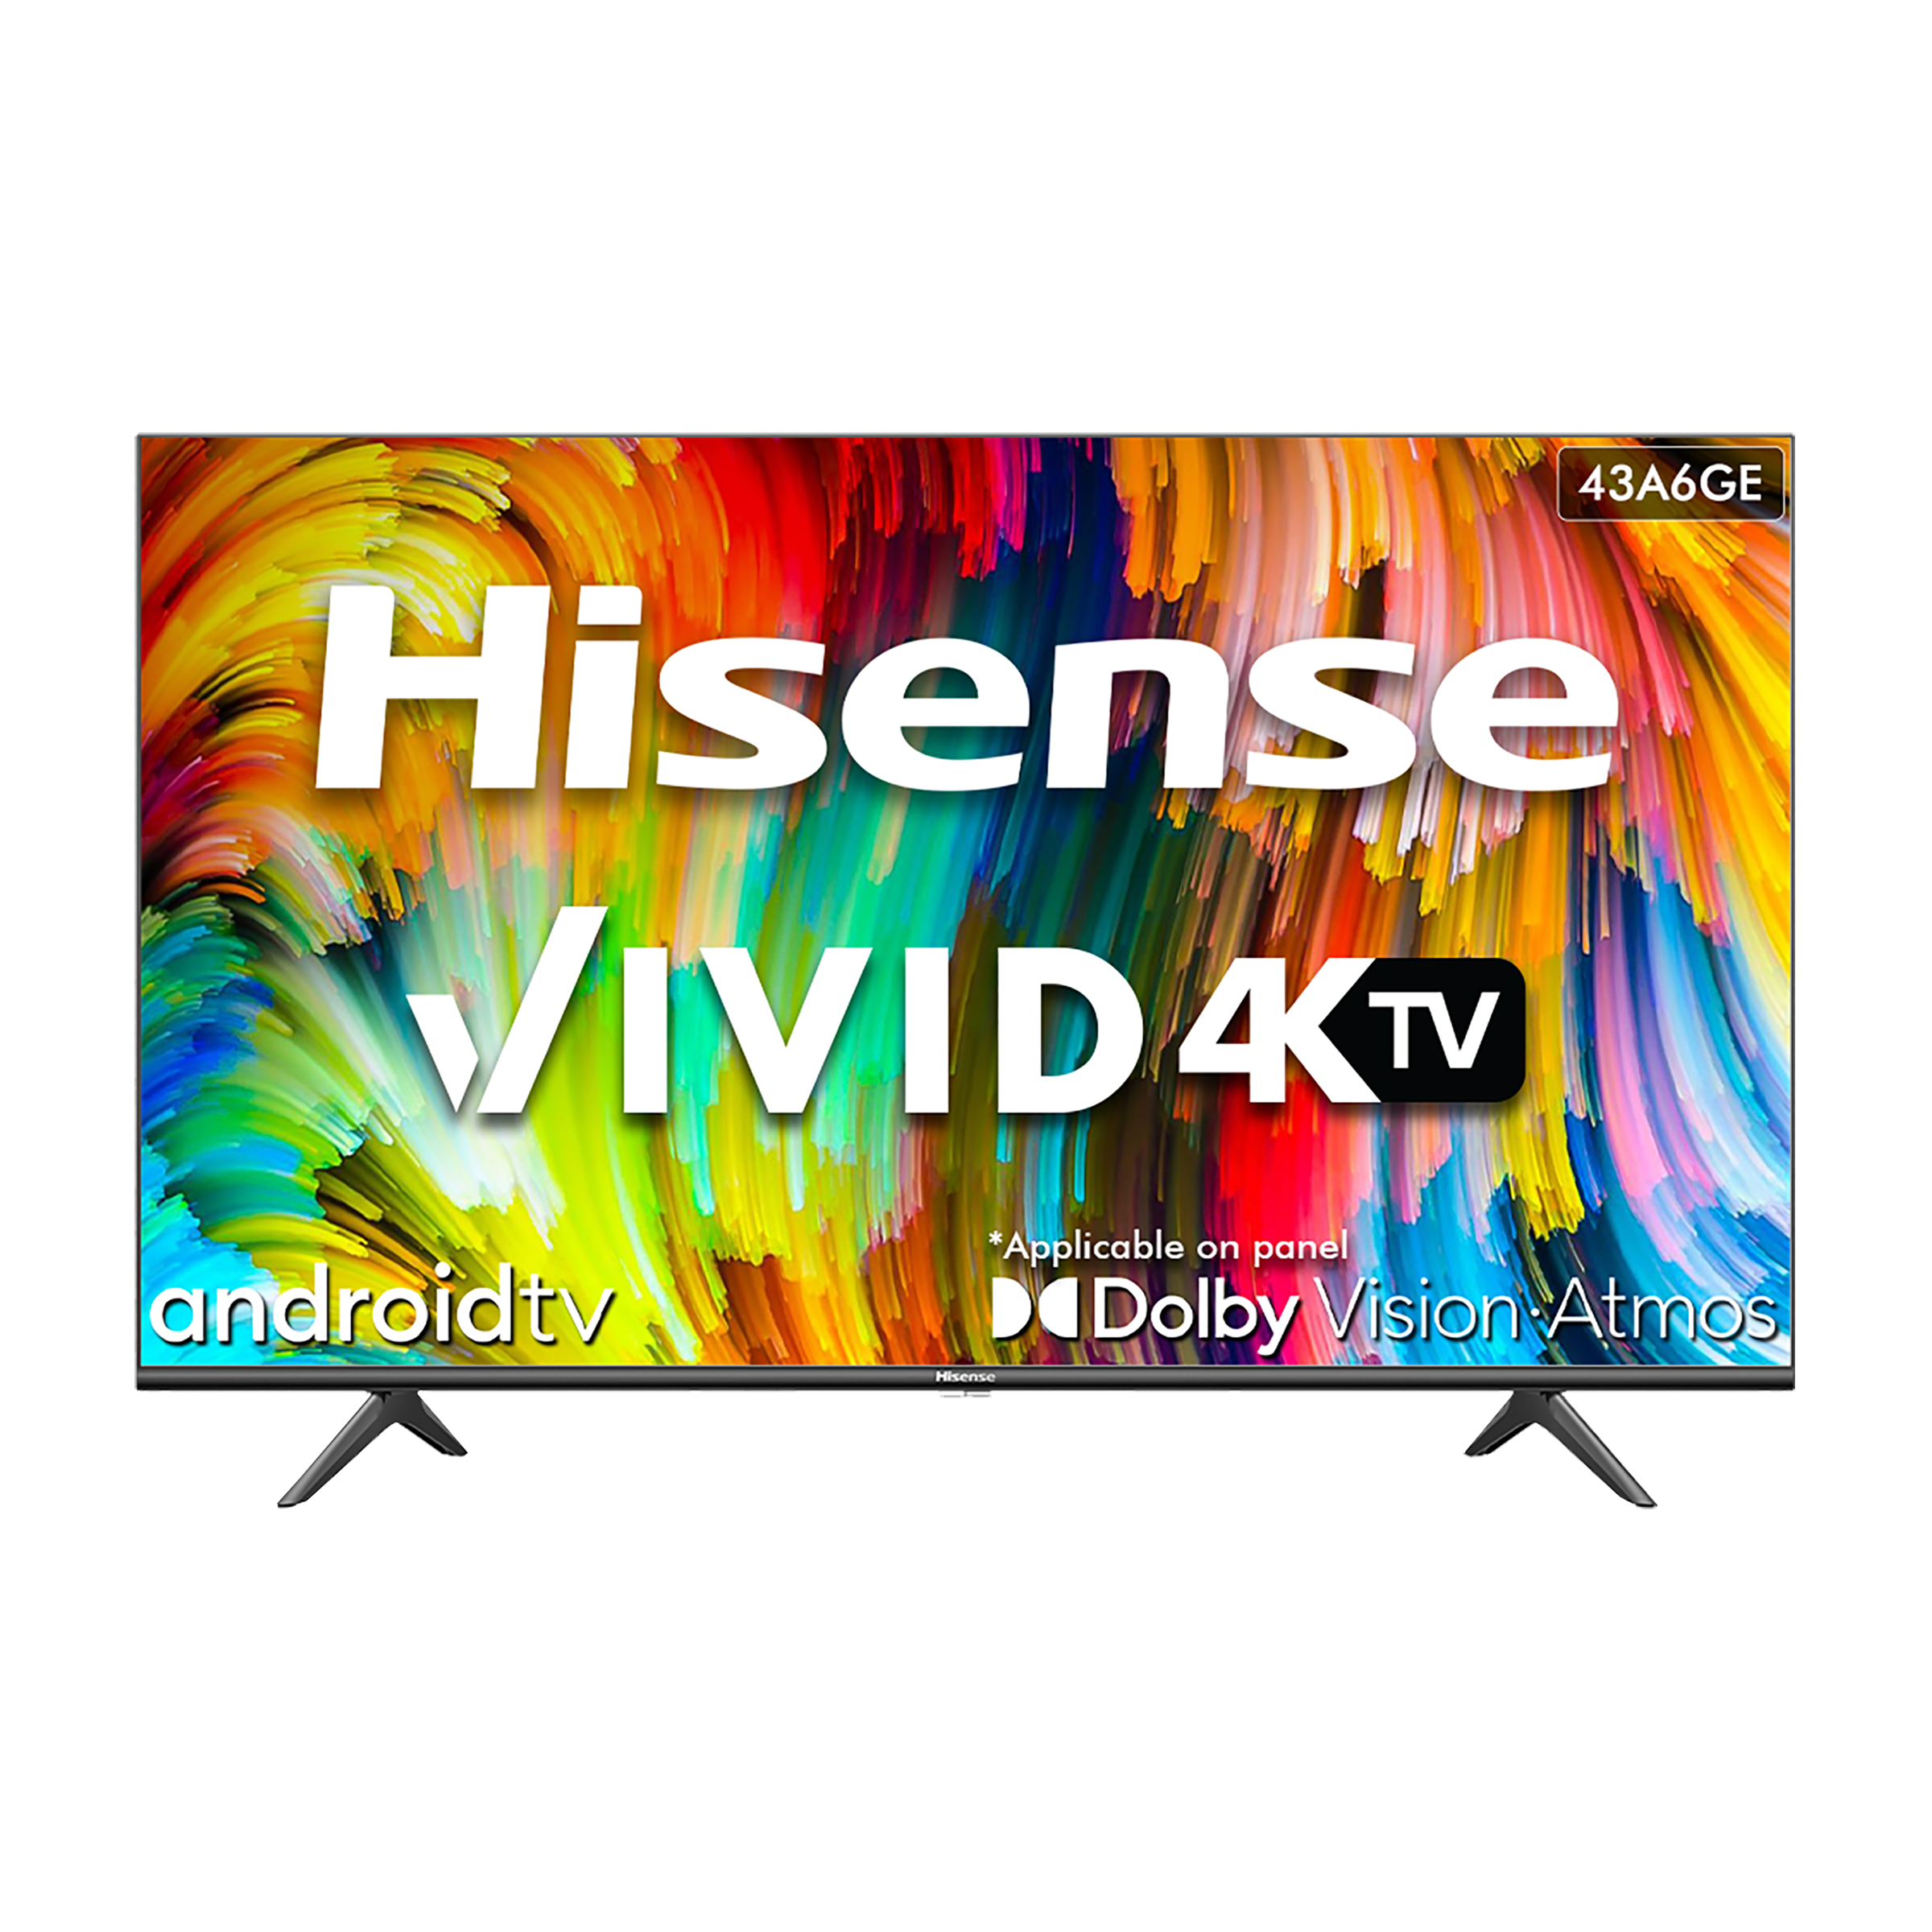 Hisense A6GE 108 cm (43 inch) 4K Ultra HD LED Android TV with Google Assistant (2021 model)_1